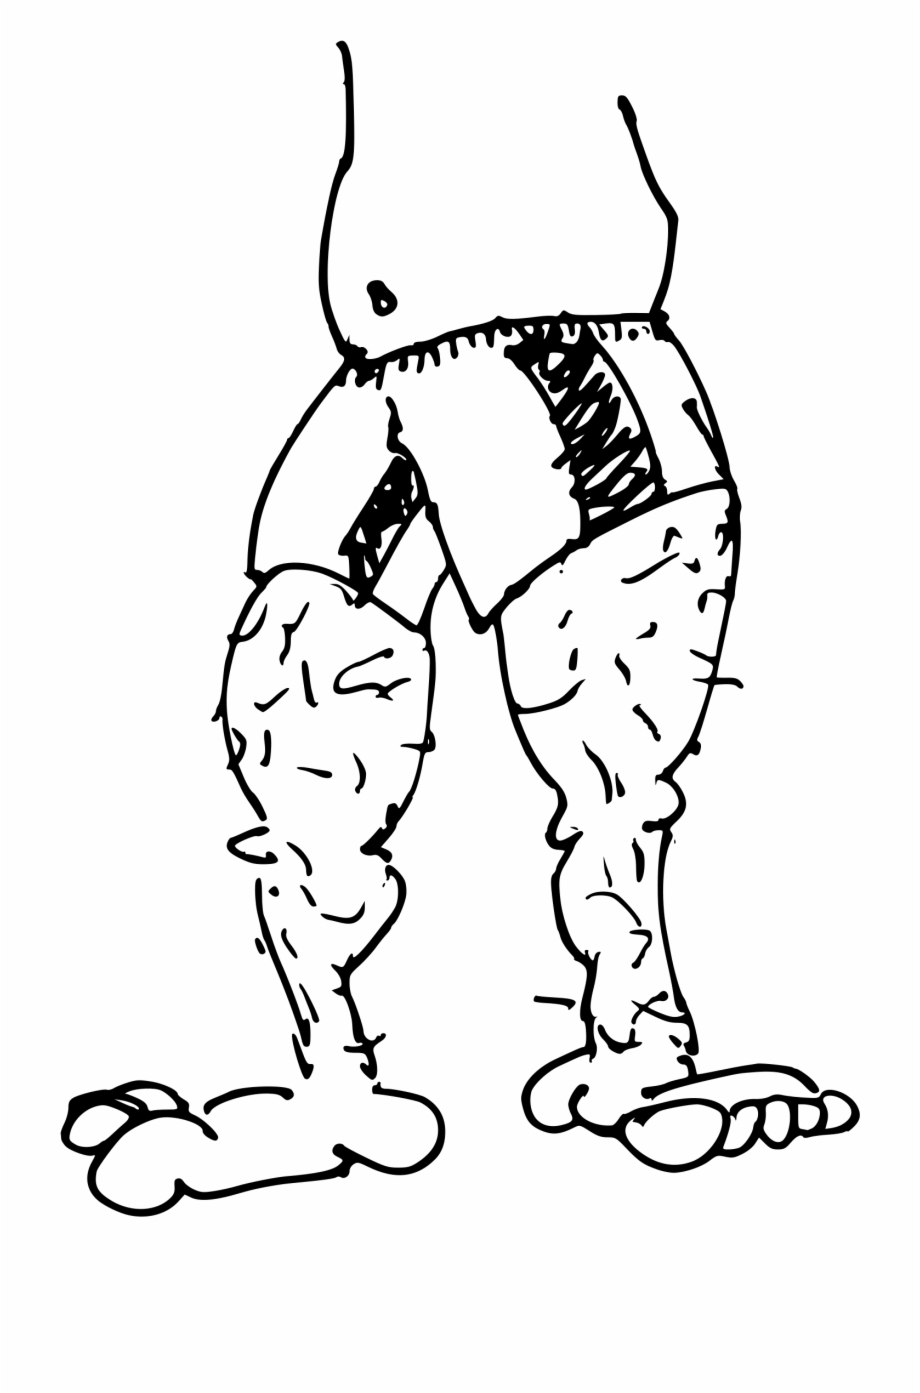 Front Legs Sketch - Clip Art Library